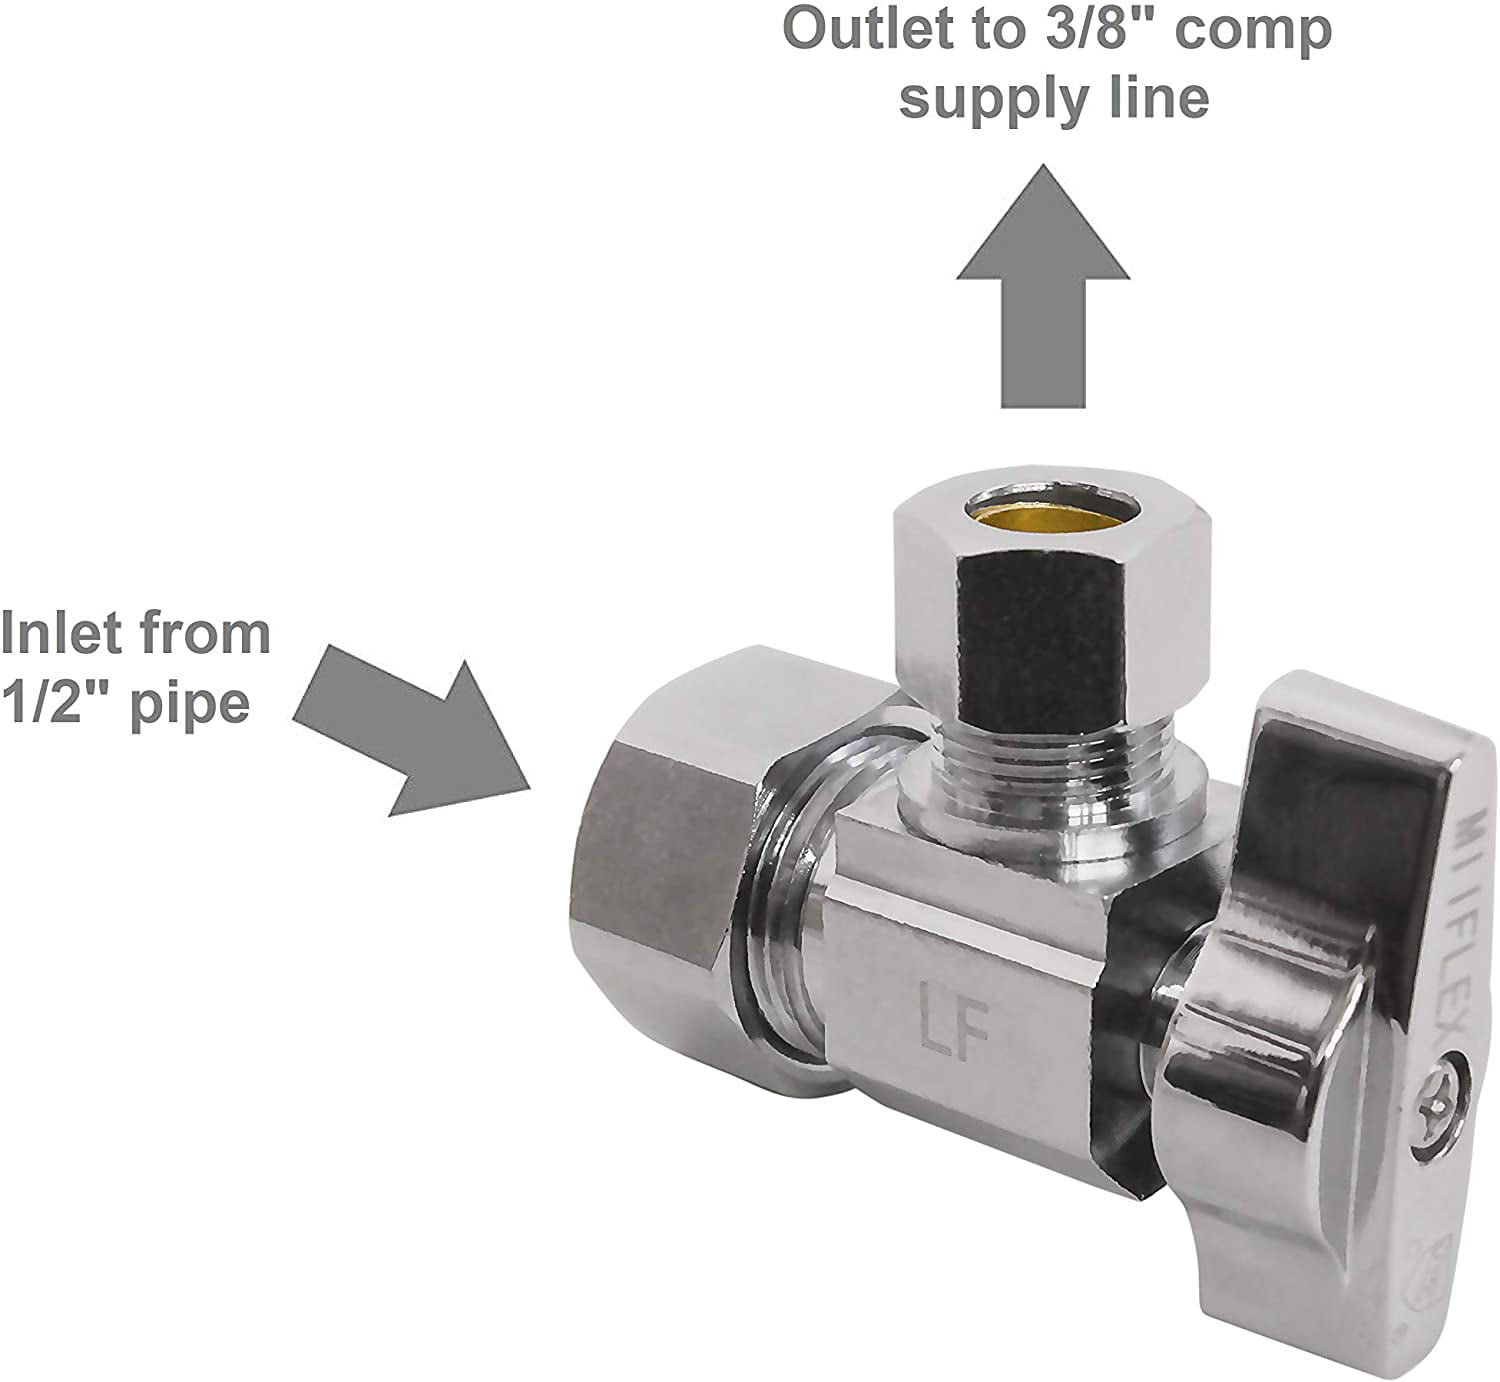 LD Valve- 1/4 Turn Angle Stop Valve 1/2-in OD X in 3/8-OD  Compression,Quarter Turn LF Brass Chrome Plated Angle Shut Off Water Supply  Stop for Faucet or Toilet Installation (2-Pack) 